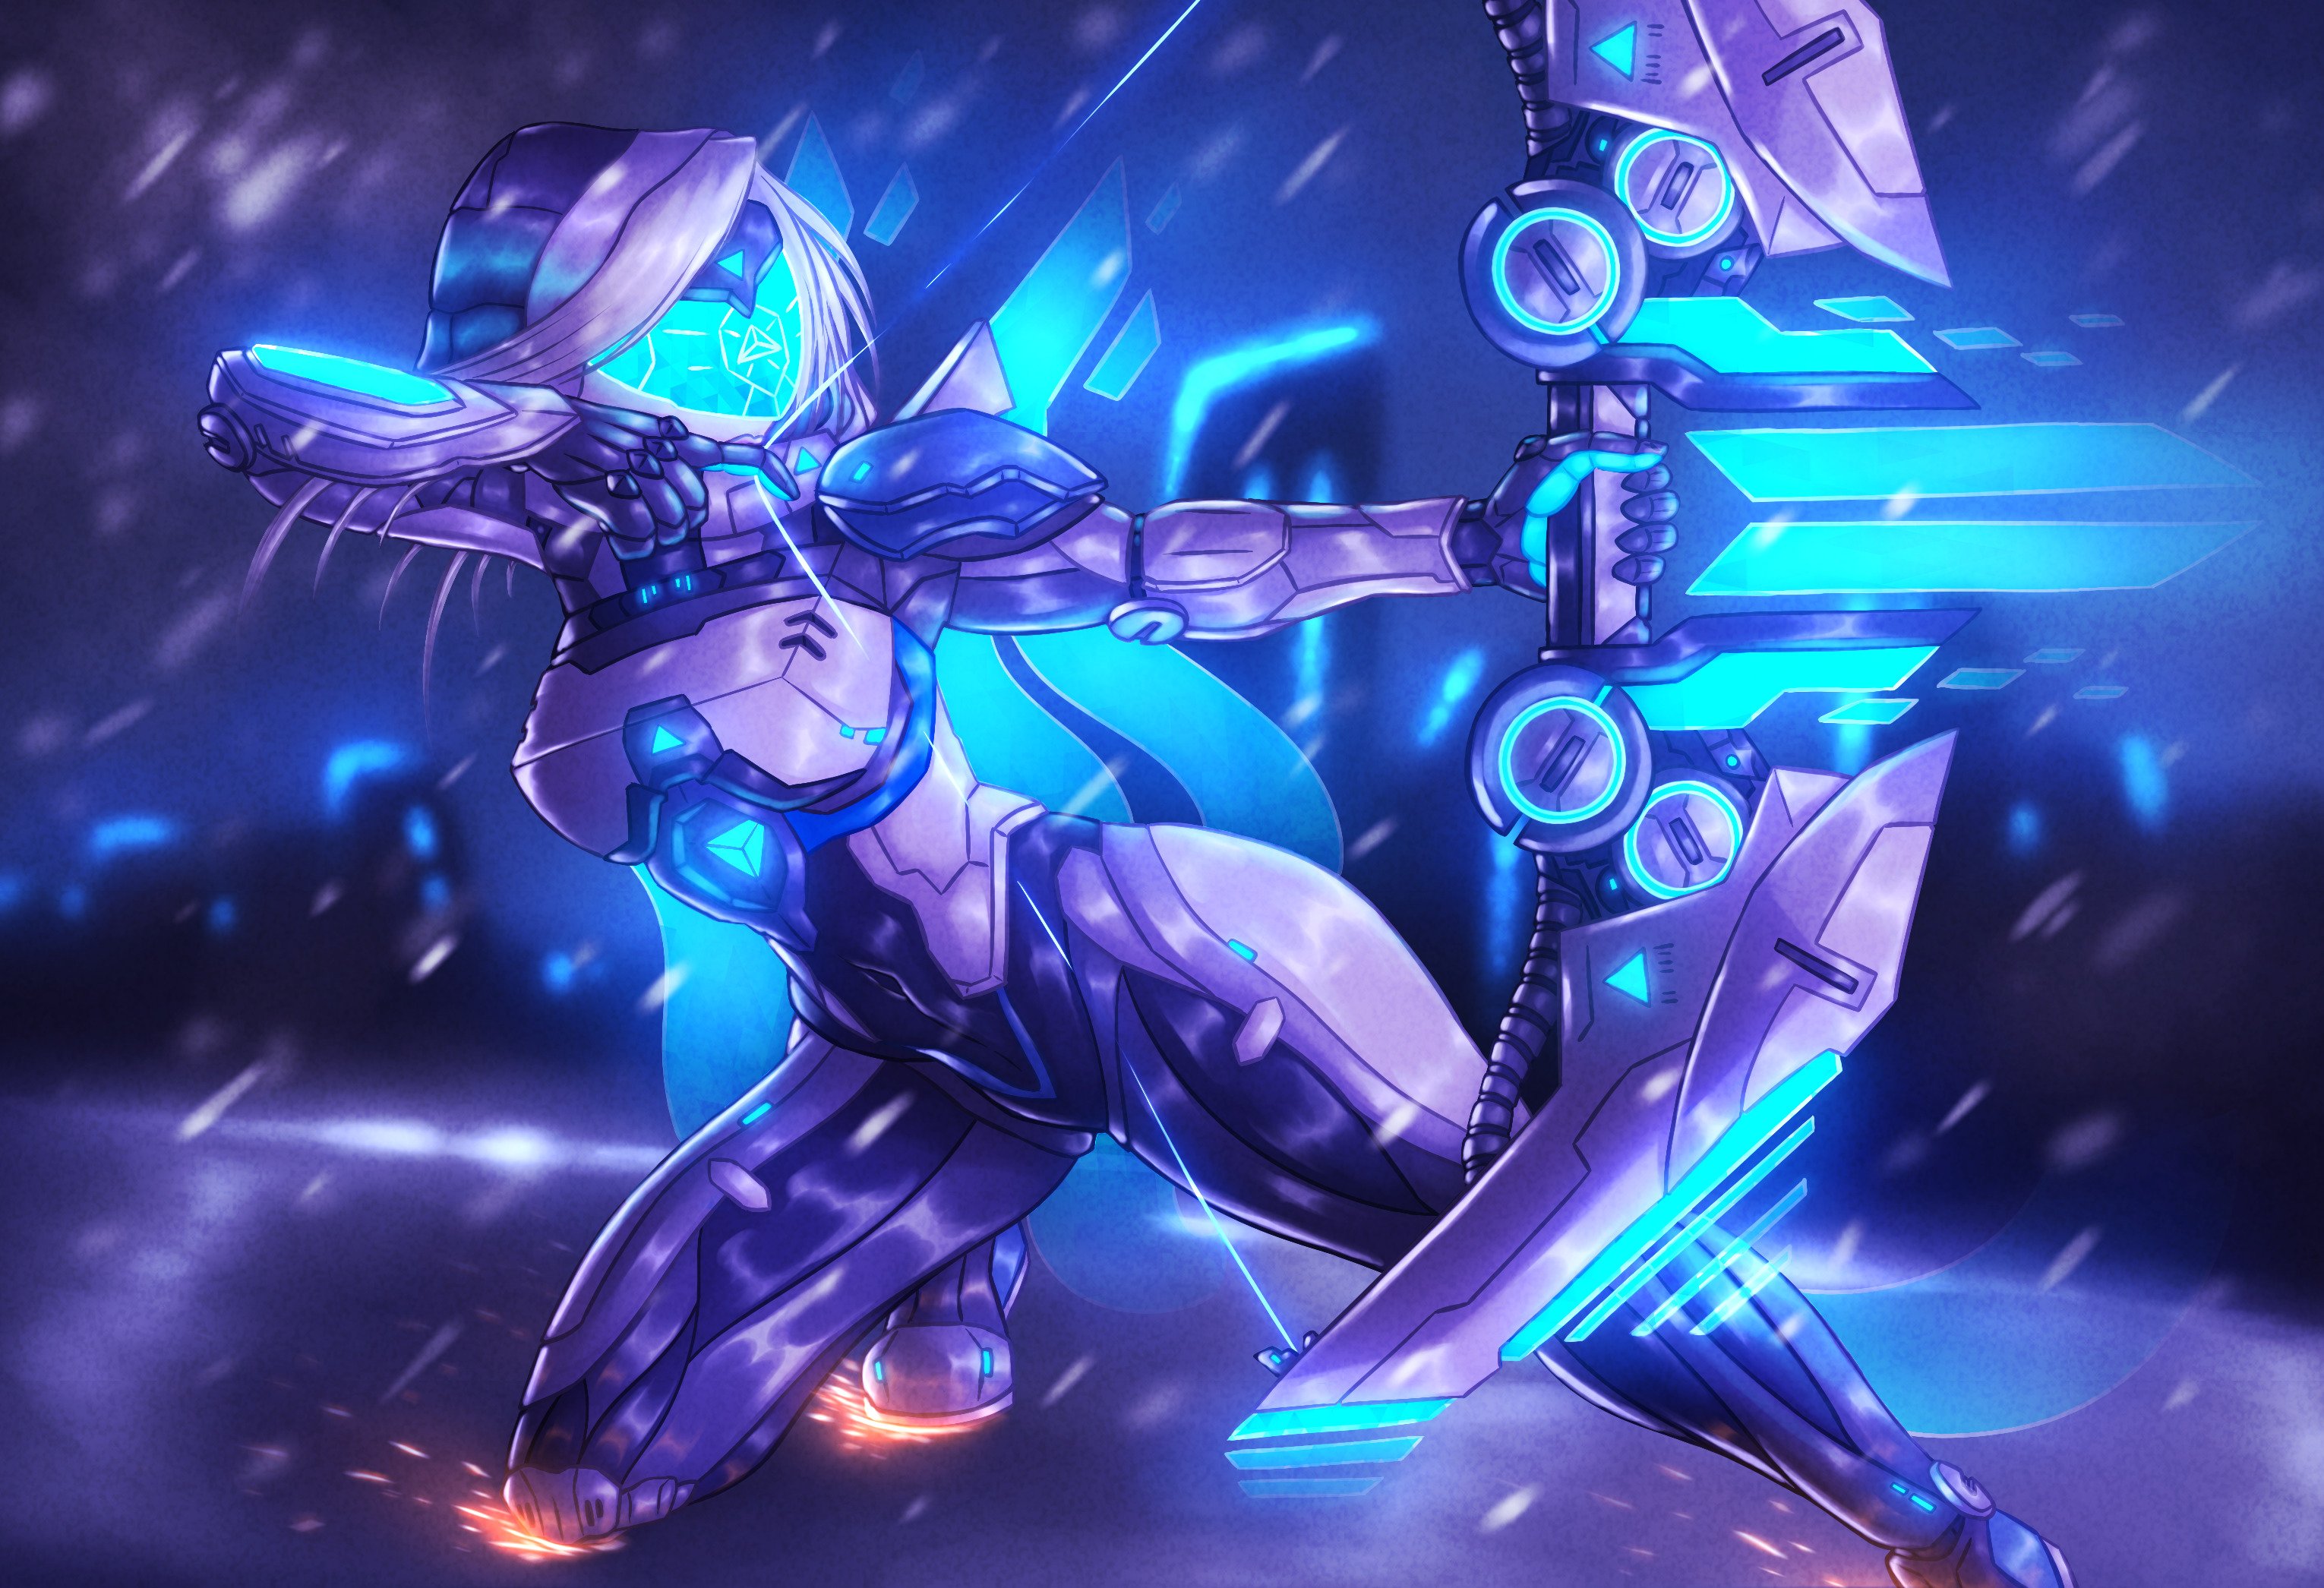 Project Ashe Dope LoL Wallpaper by Shad0w Galaxy 4673 Wallpapers